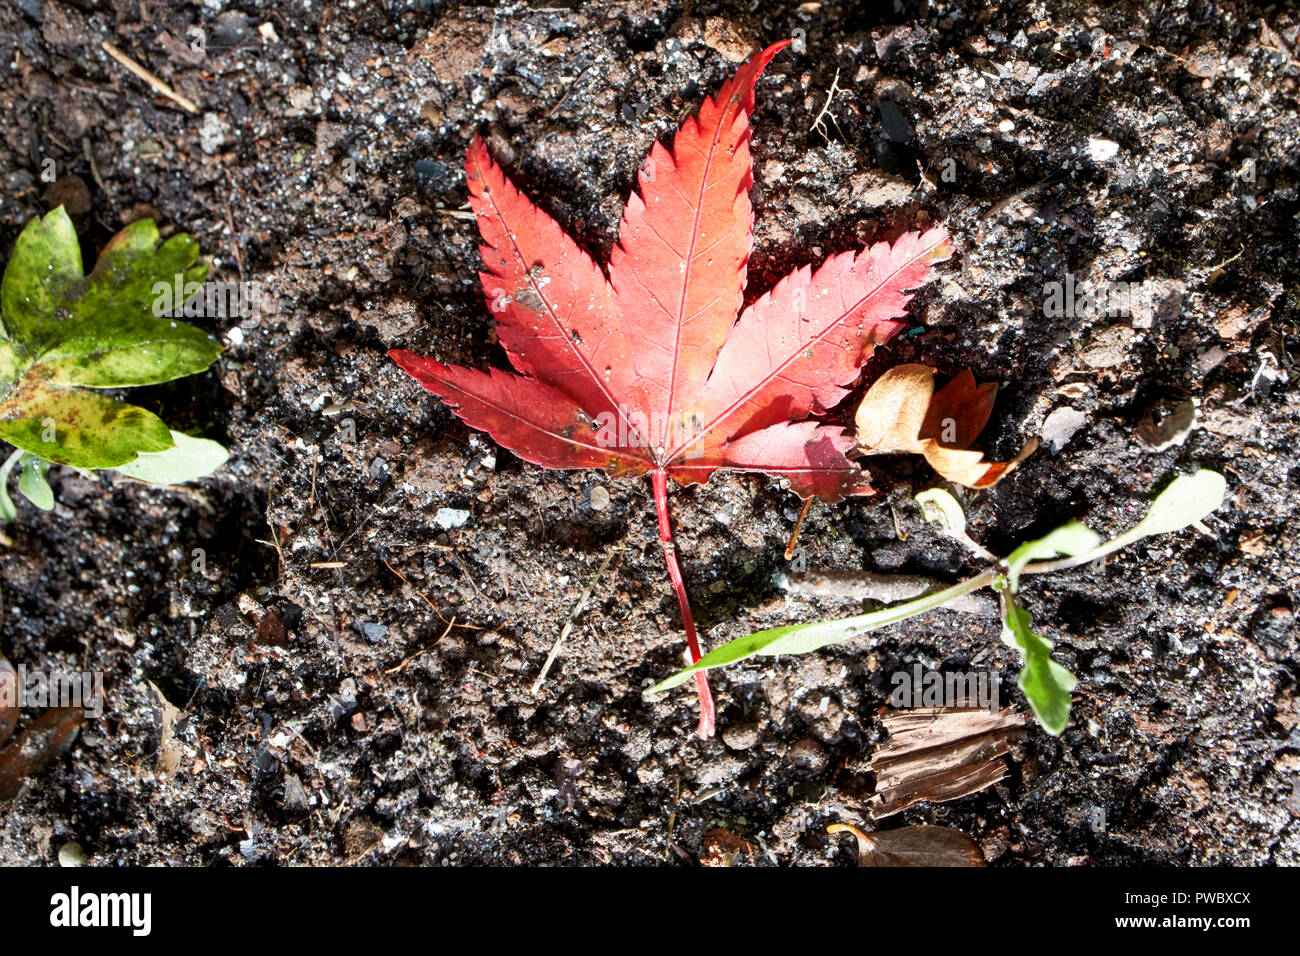 red fallen acer leaf lying on ground next to small rocket plant growing plants in garden Stock Photo